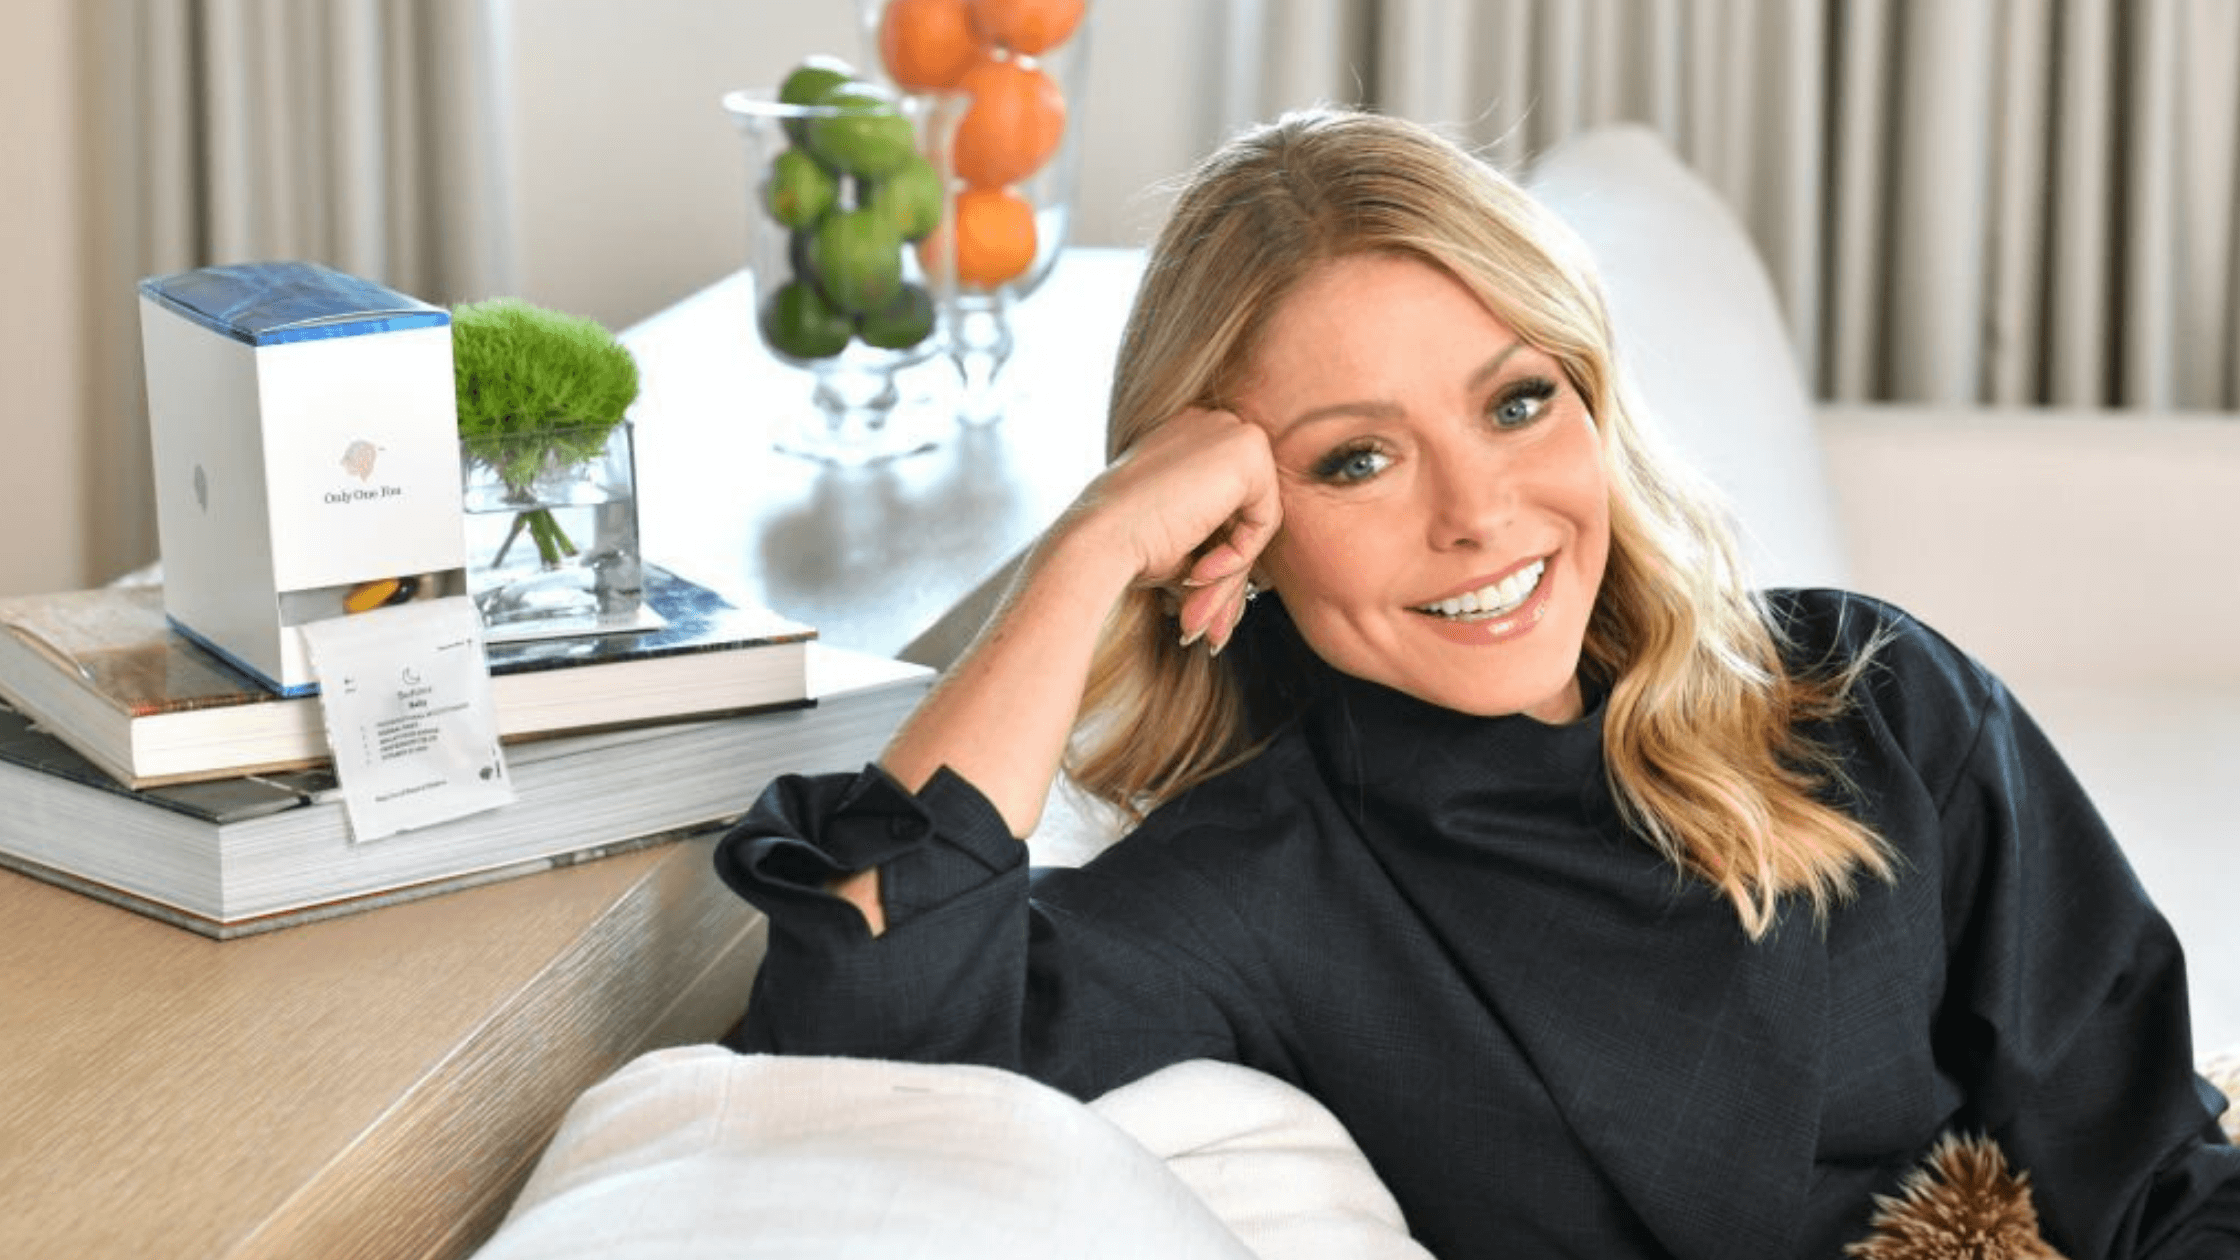 Kelly Ripa's Net Worth, Age, Children, Spouse, Height, Salary, Movies